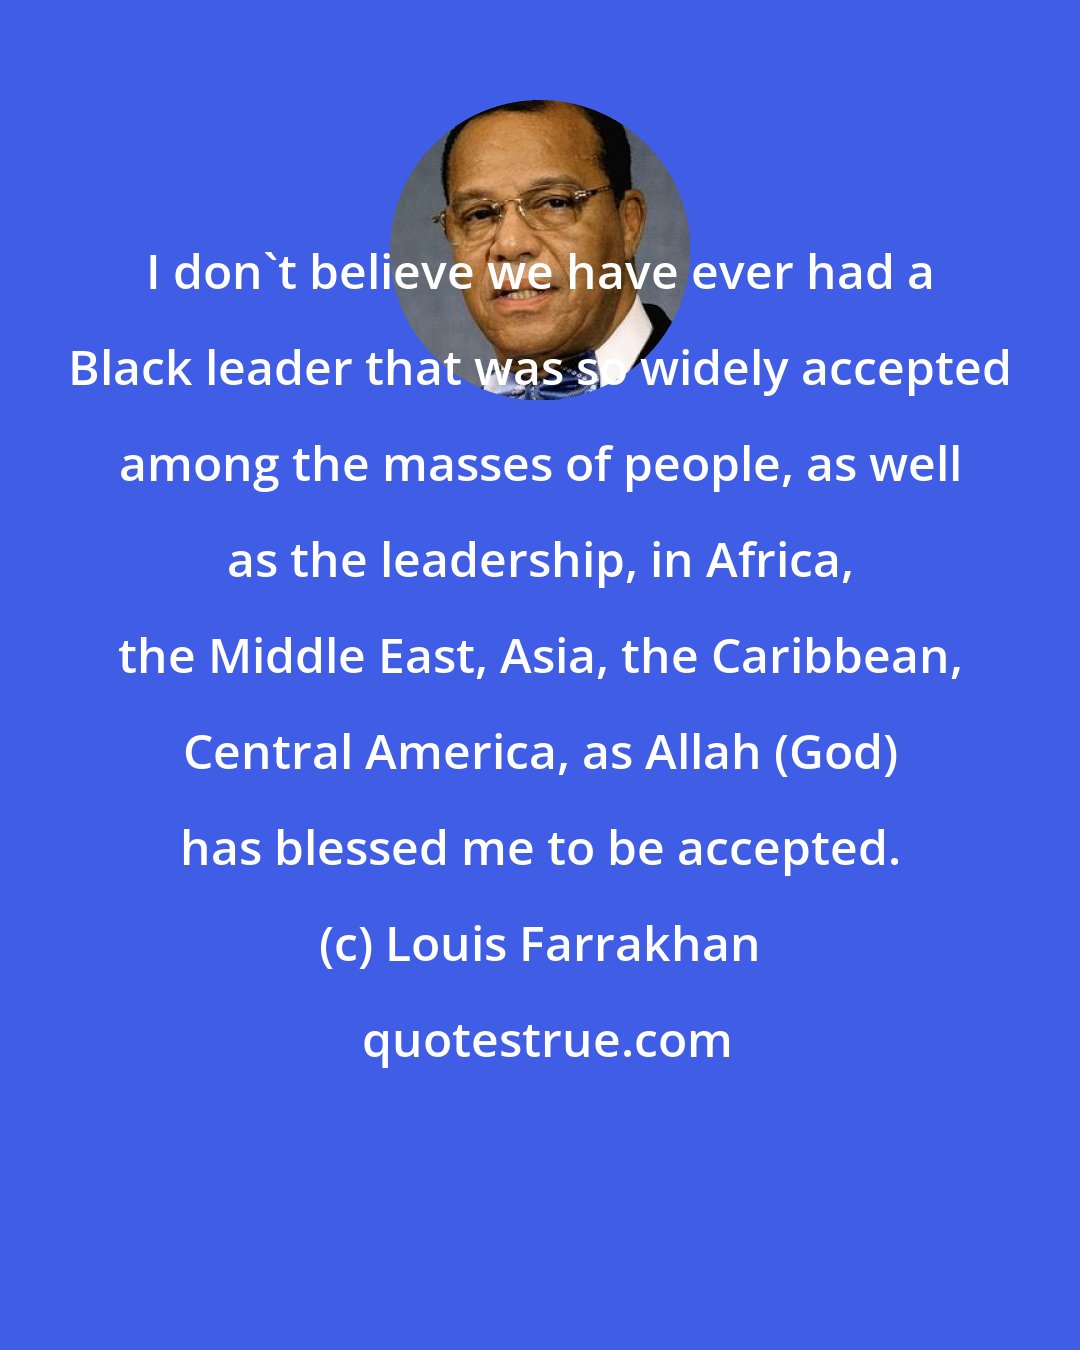 Louis Farrakhan: I don't believe we have ever had a Black leader that was so widely accepted among the masses of people, as well as the leadership, in Africa, the Middle East, Asia, the Caribbean, Central America, as Allah (God) has blessed me to be accepted.